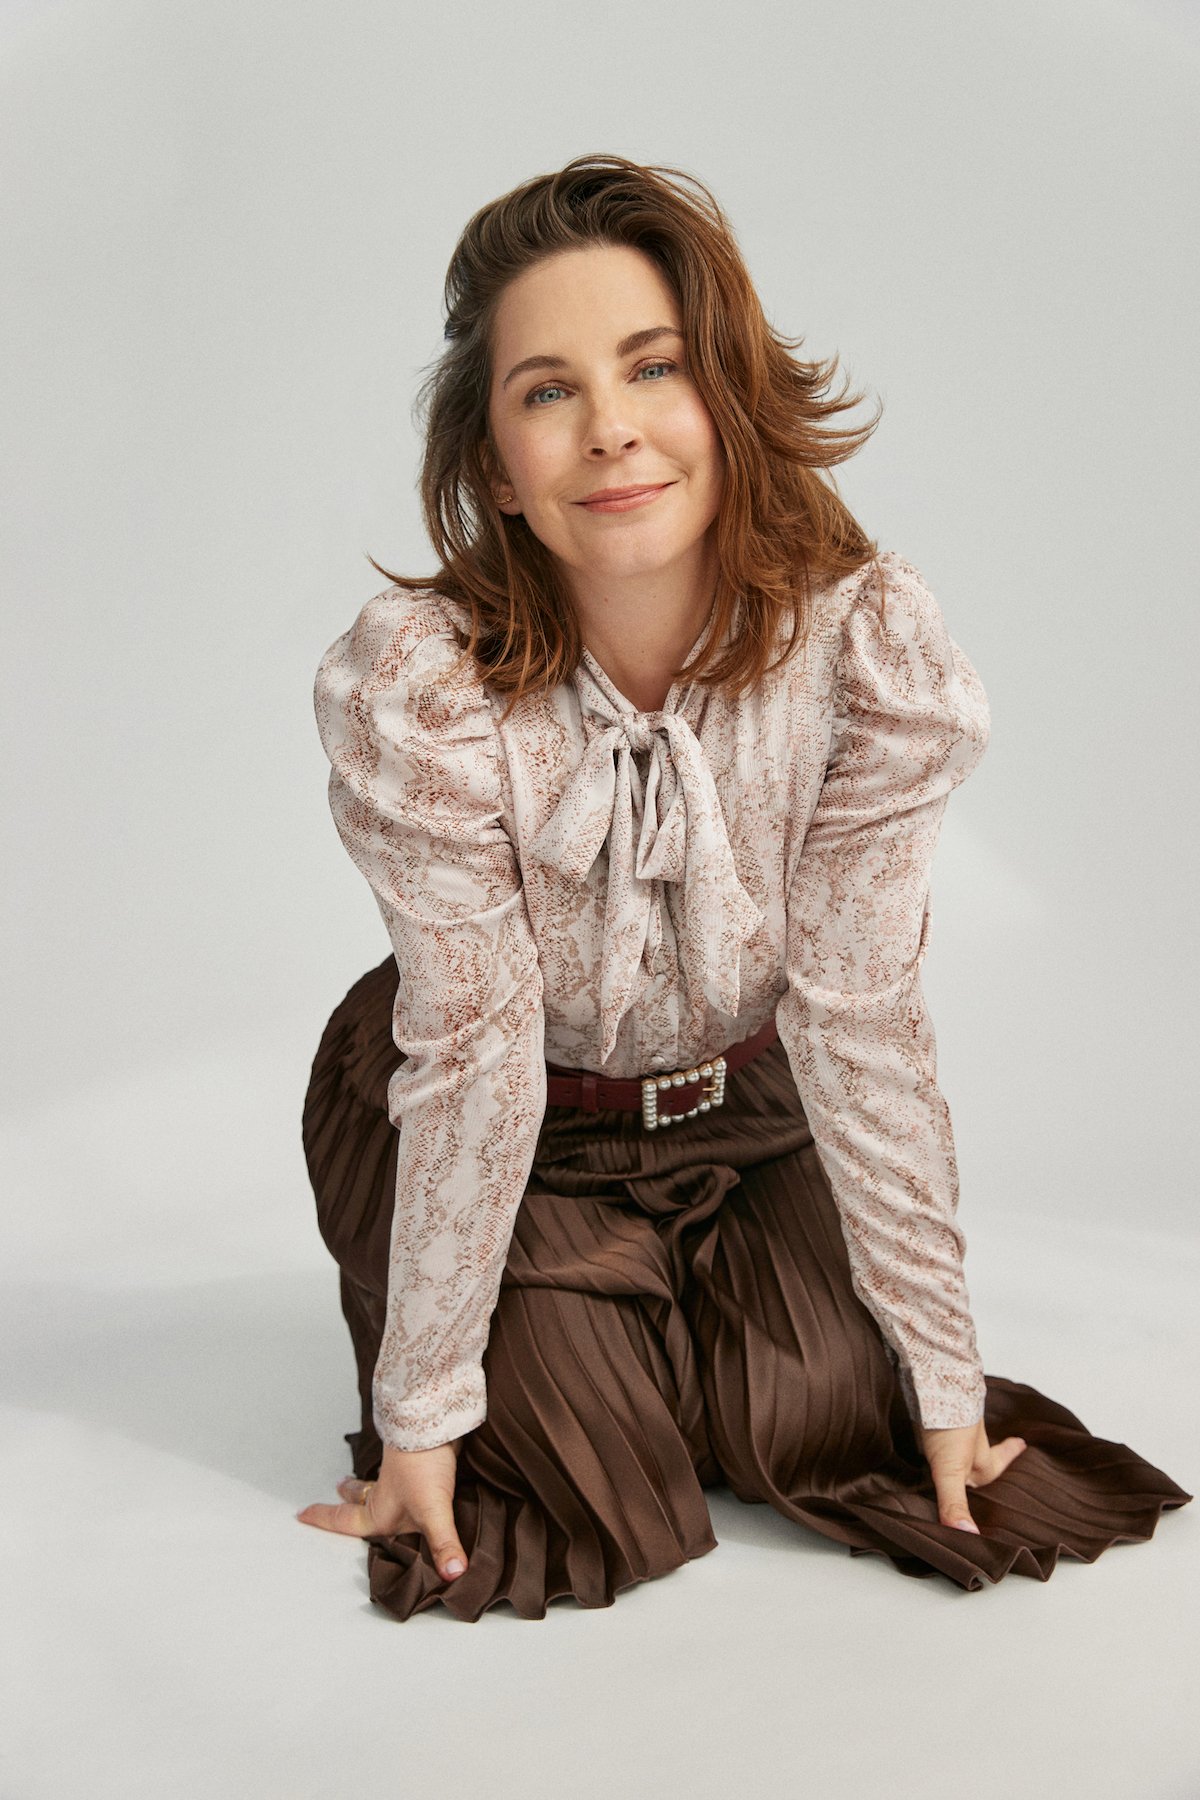 Portrait of Allison Gabriel from 'Sweet Magnolias' kneeling and wearing a tie-neck blouse and long brown skirt